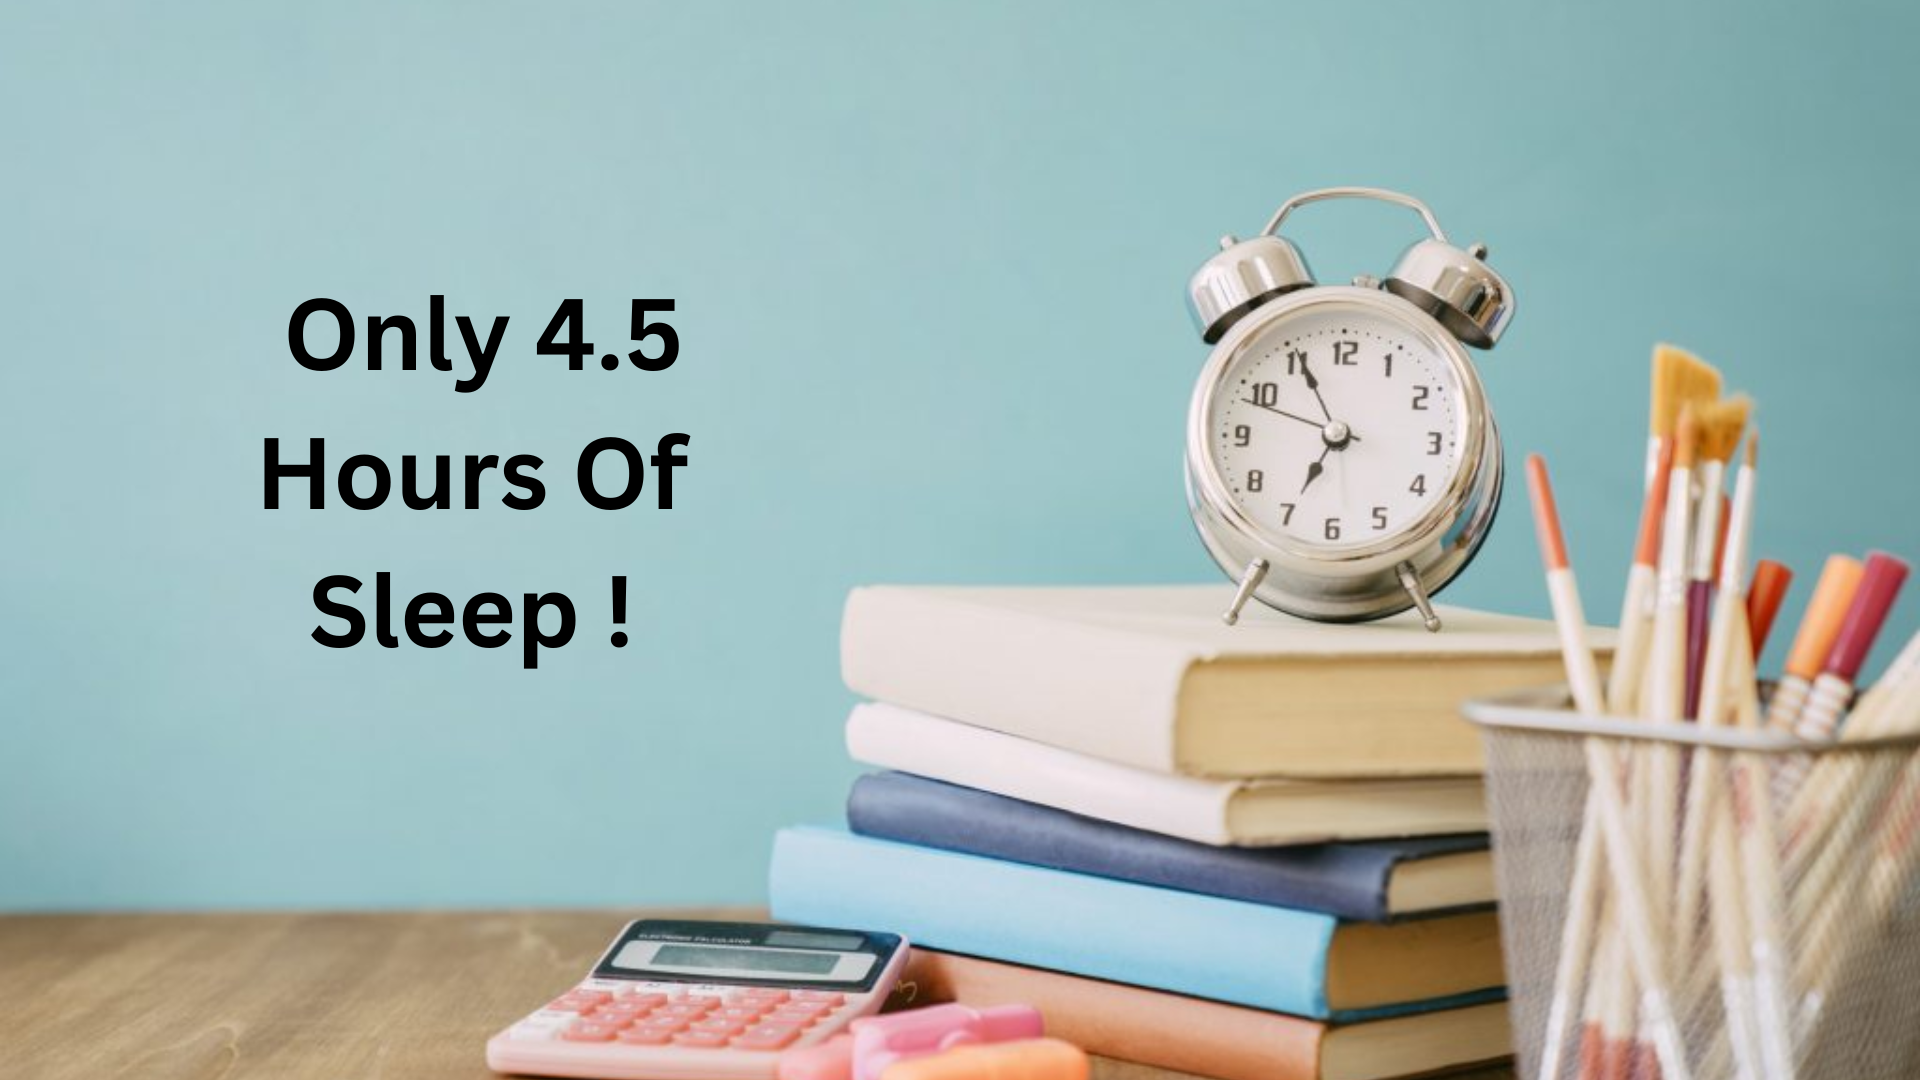 IIT-JEE Aspirant’s Daily Routine Includes Only 4.5 Hours Of Sleep